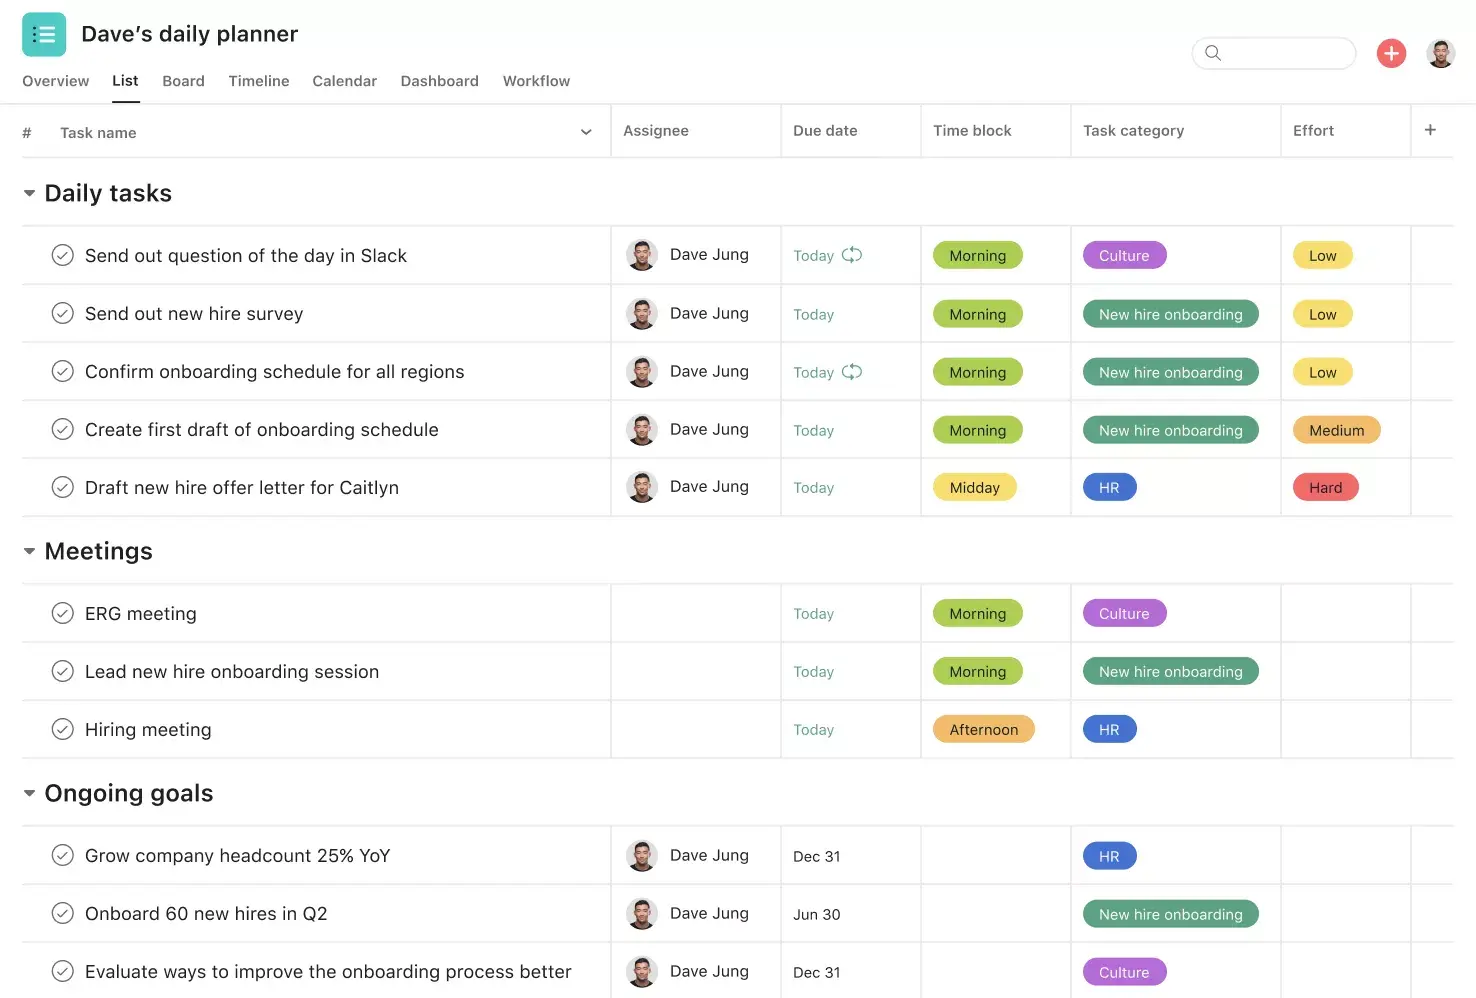 [Product ui] Dave's Daily planner project template in Asana (list view)